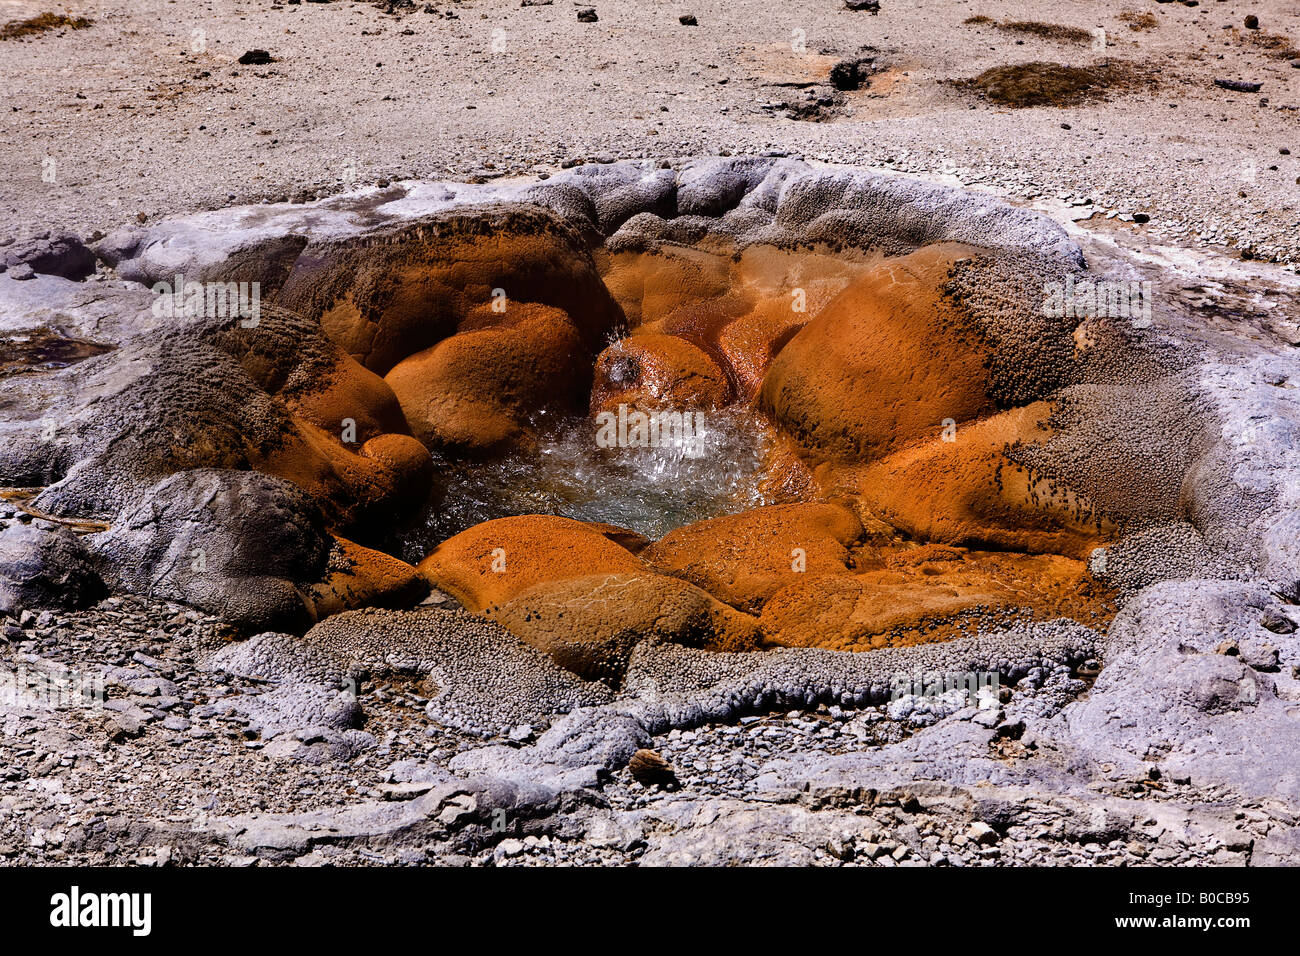 Image looking down and into the depths of Shell Geyser in the Biscuit Geyser Basin Stock Photo